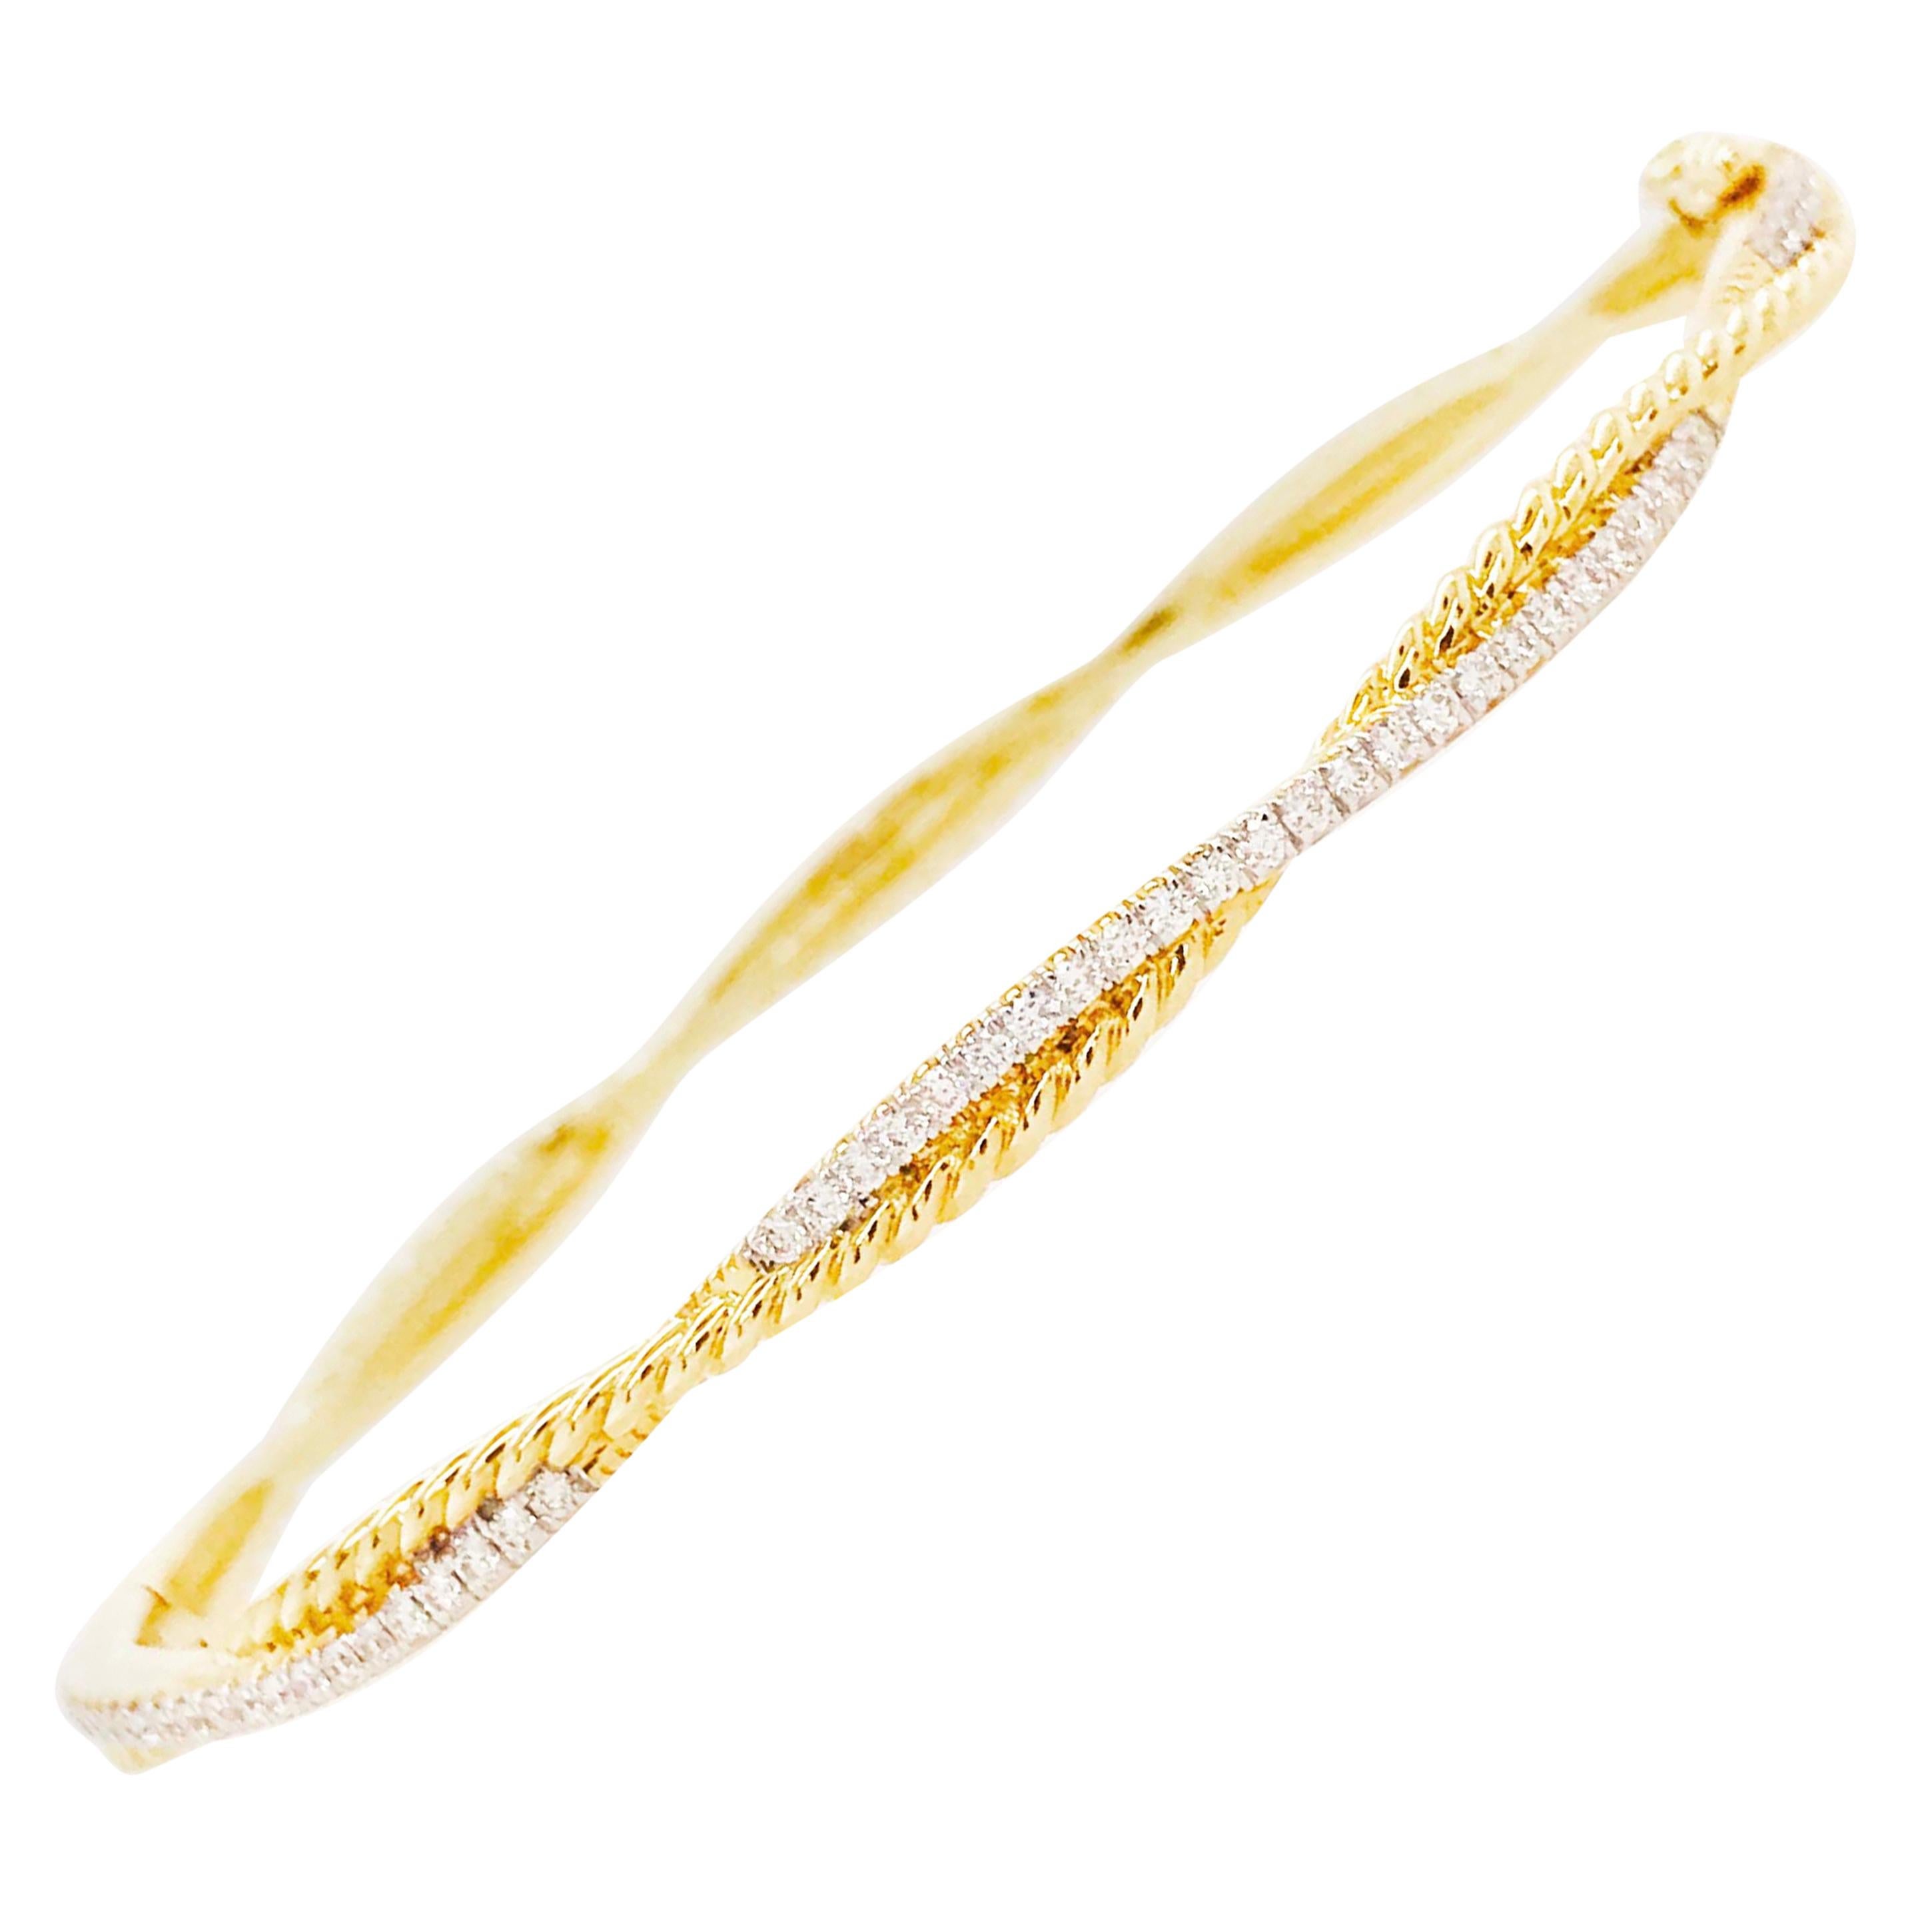 Bangle Tennis Bracelet a Twist of Diamonds and Rope Design in 14 Karat Gold For Sale